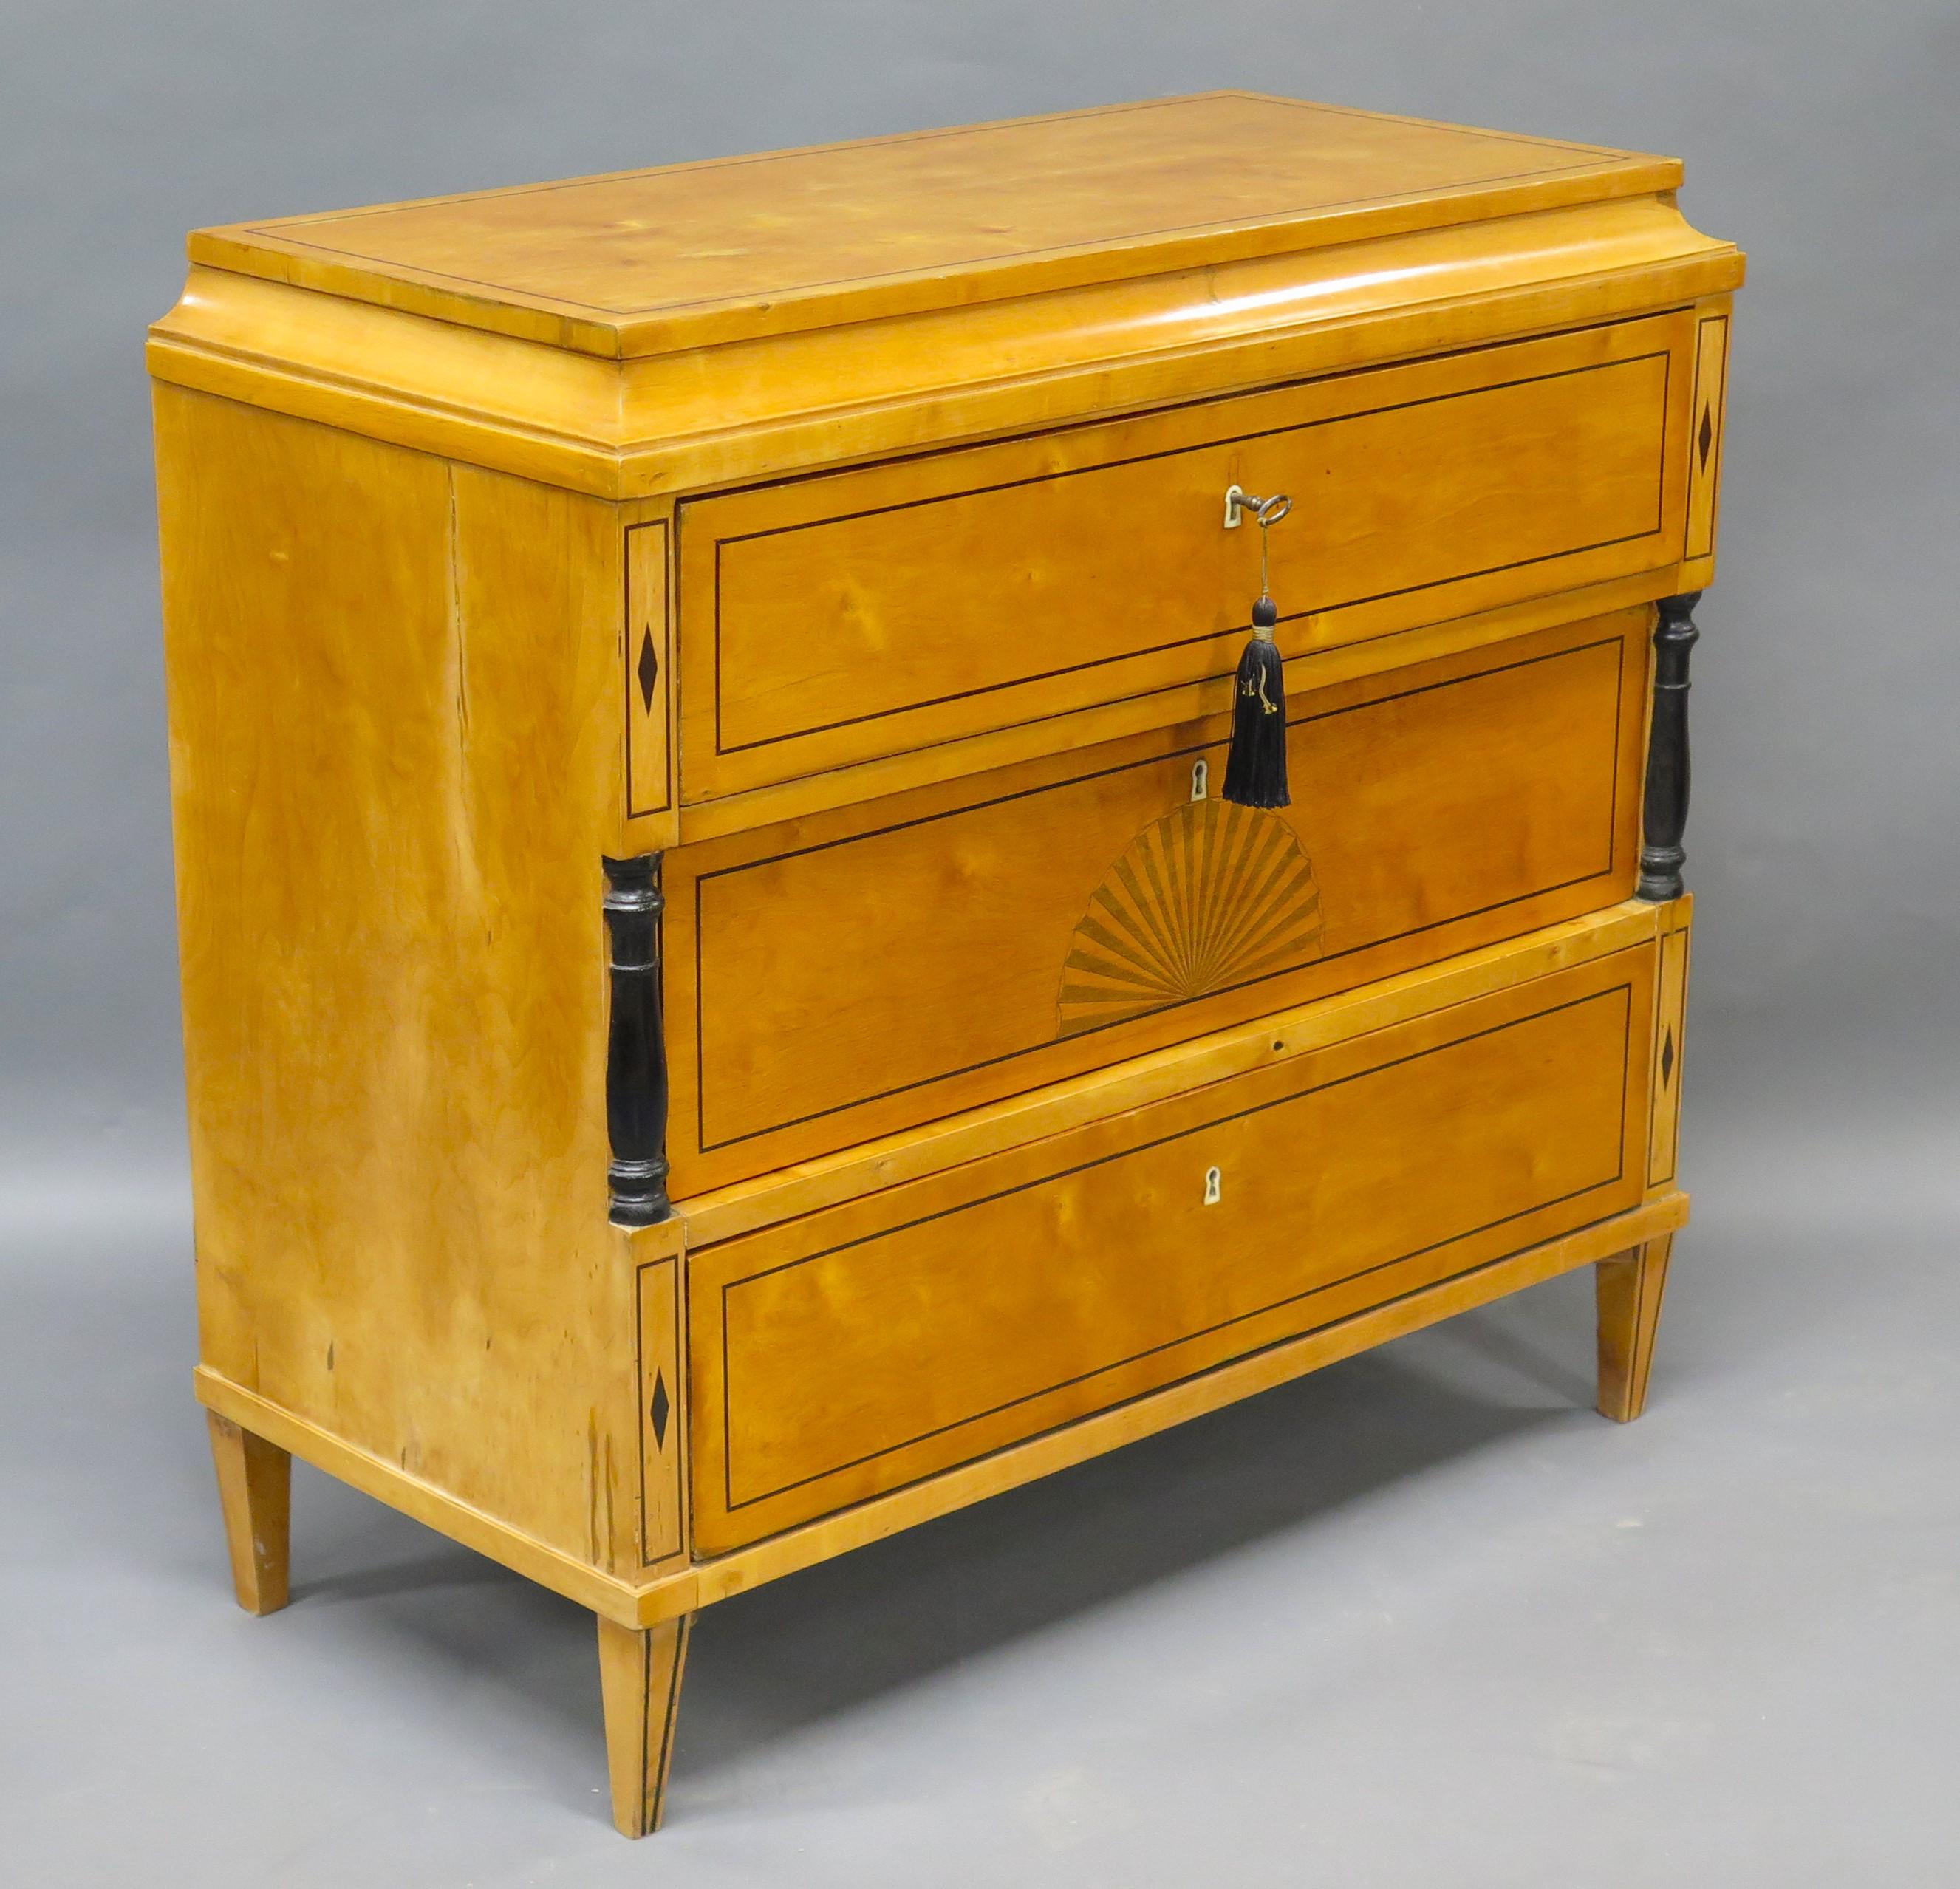 a biedermeier inlaid commode first half 19th century the recessed top over three inlaid long drawers, top and bottom drawers with twin daimonds inlaid daimonds stiles the center drawers with center inlaid fan medallion flanked by ebonyed stiles at